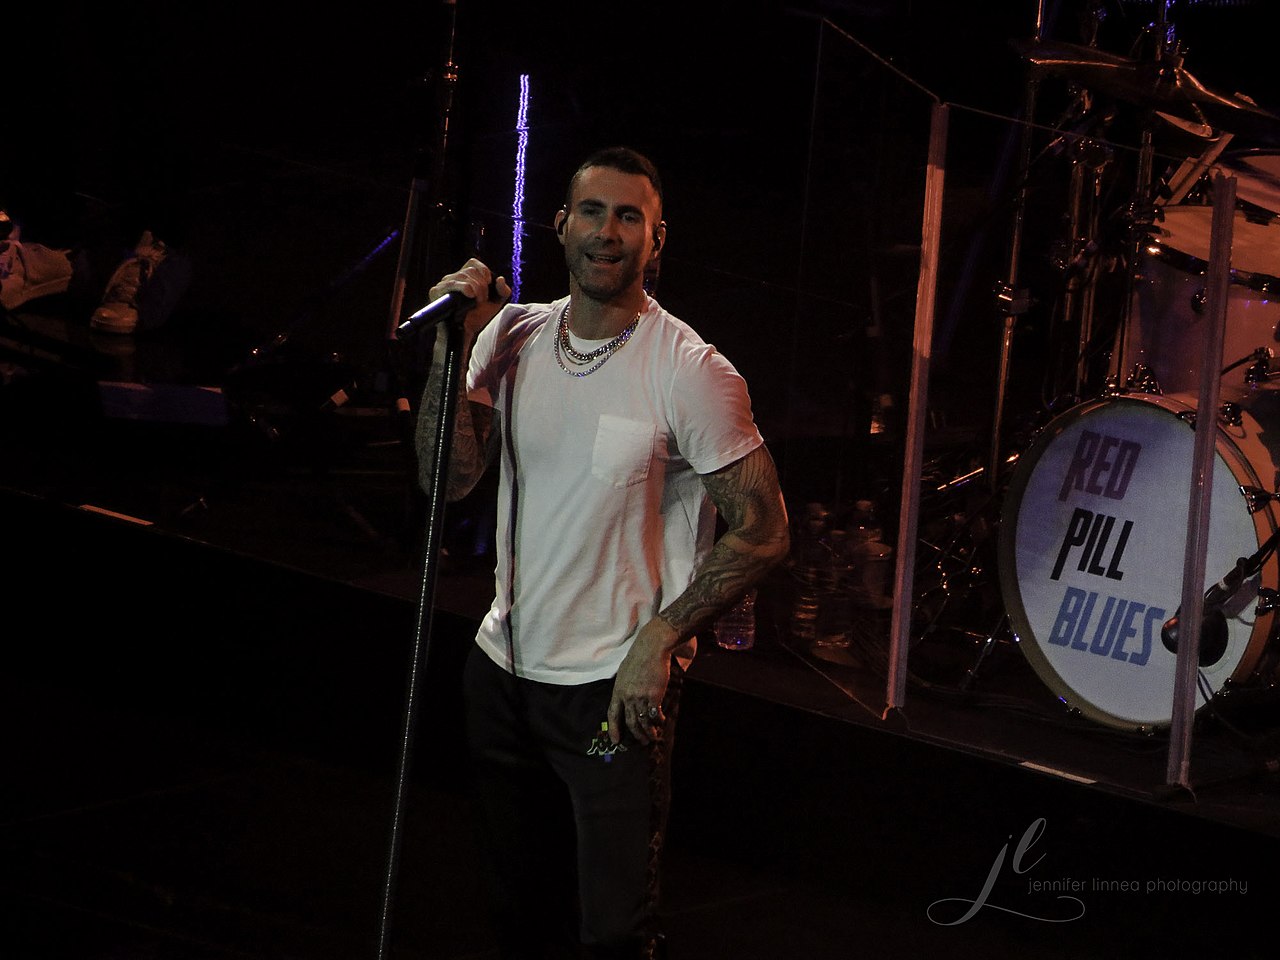 Maroon 5 frontman Adam Levine performing in front of a sold out crowd at the Pepsi Center in Denver, CO while on the Red Pill Blues Tour.